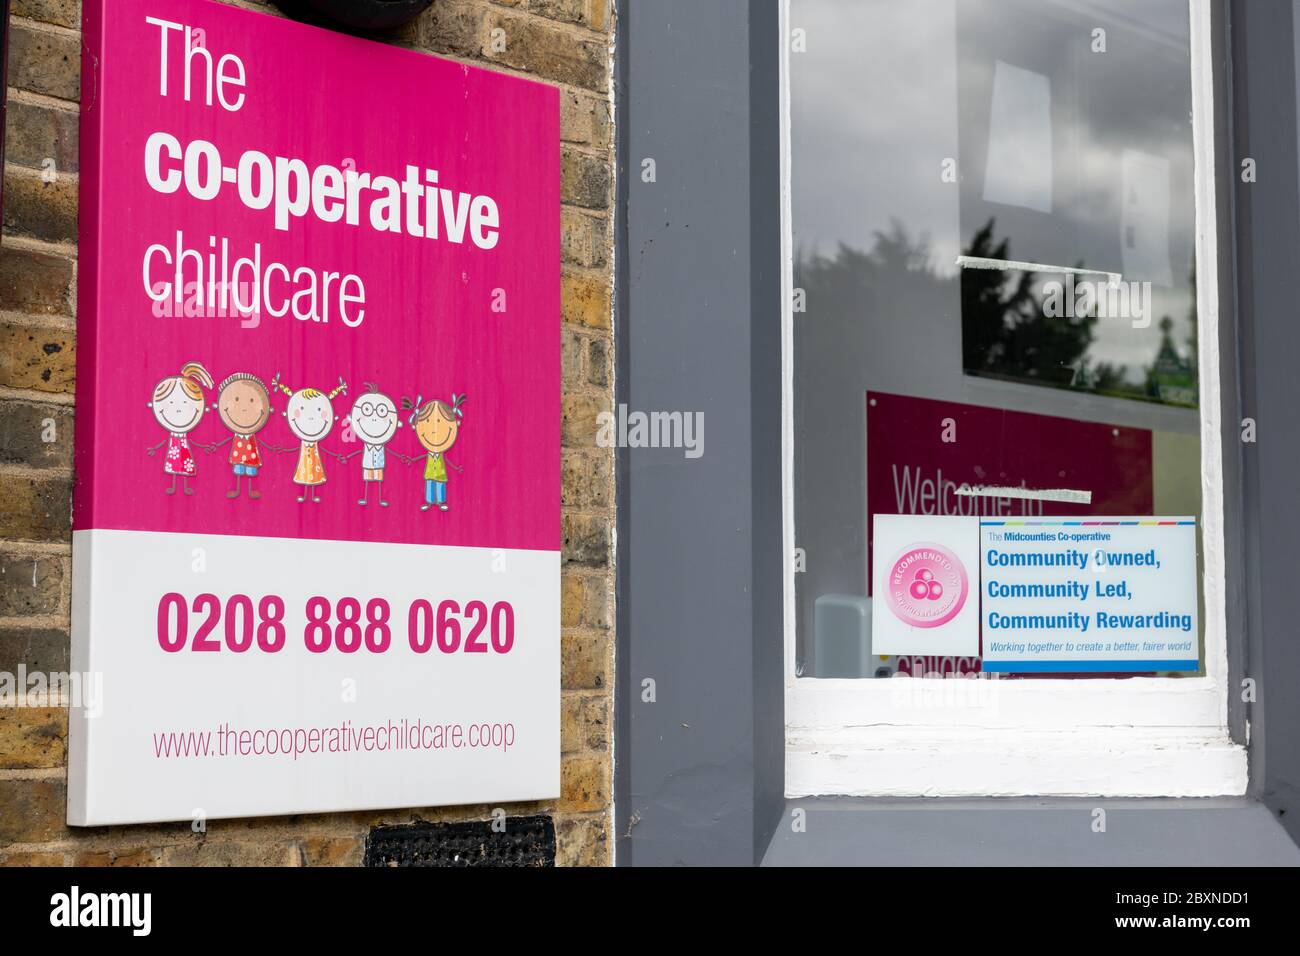 The name sign by the entrance to a Co-operative childcare nursury. Stock Photo